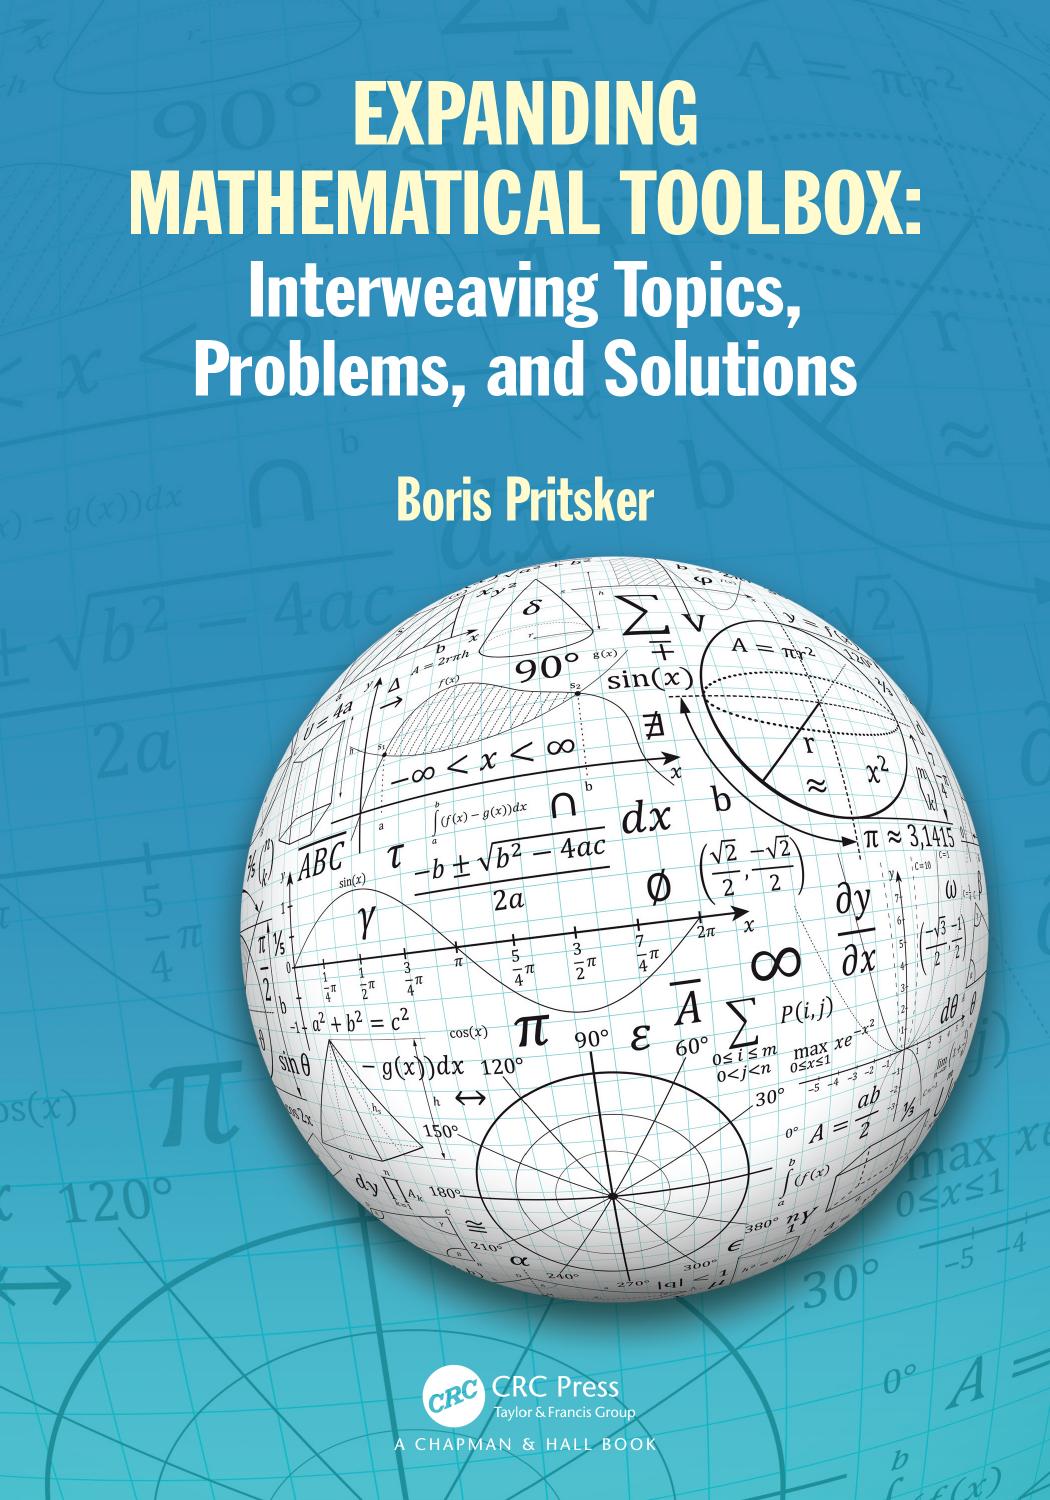 Expanding Mathematical Toolbox: Interweaving Topics, Problems, and Solutions by Boris Pritsker